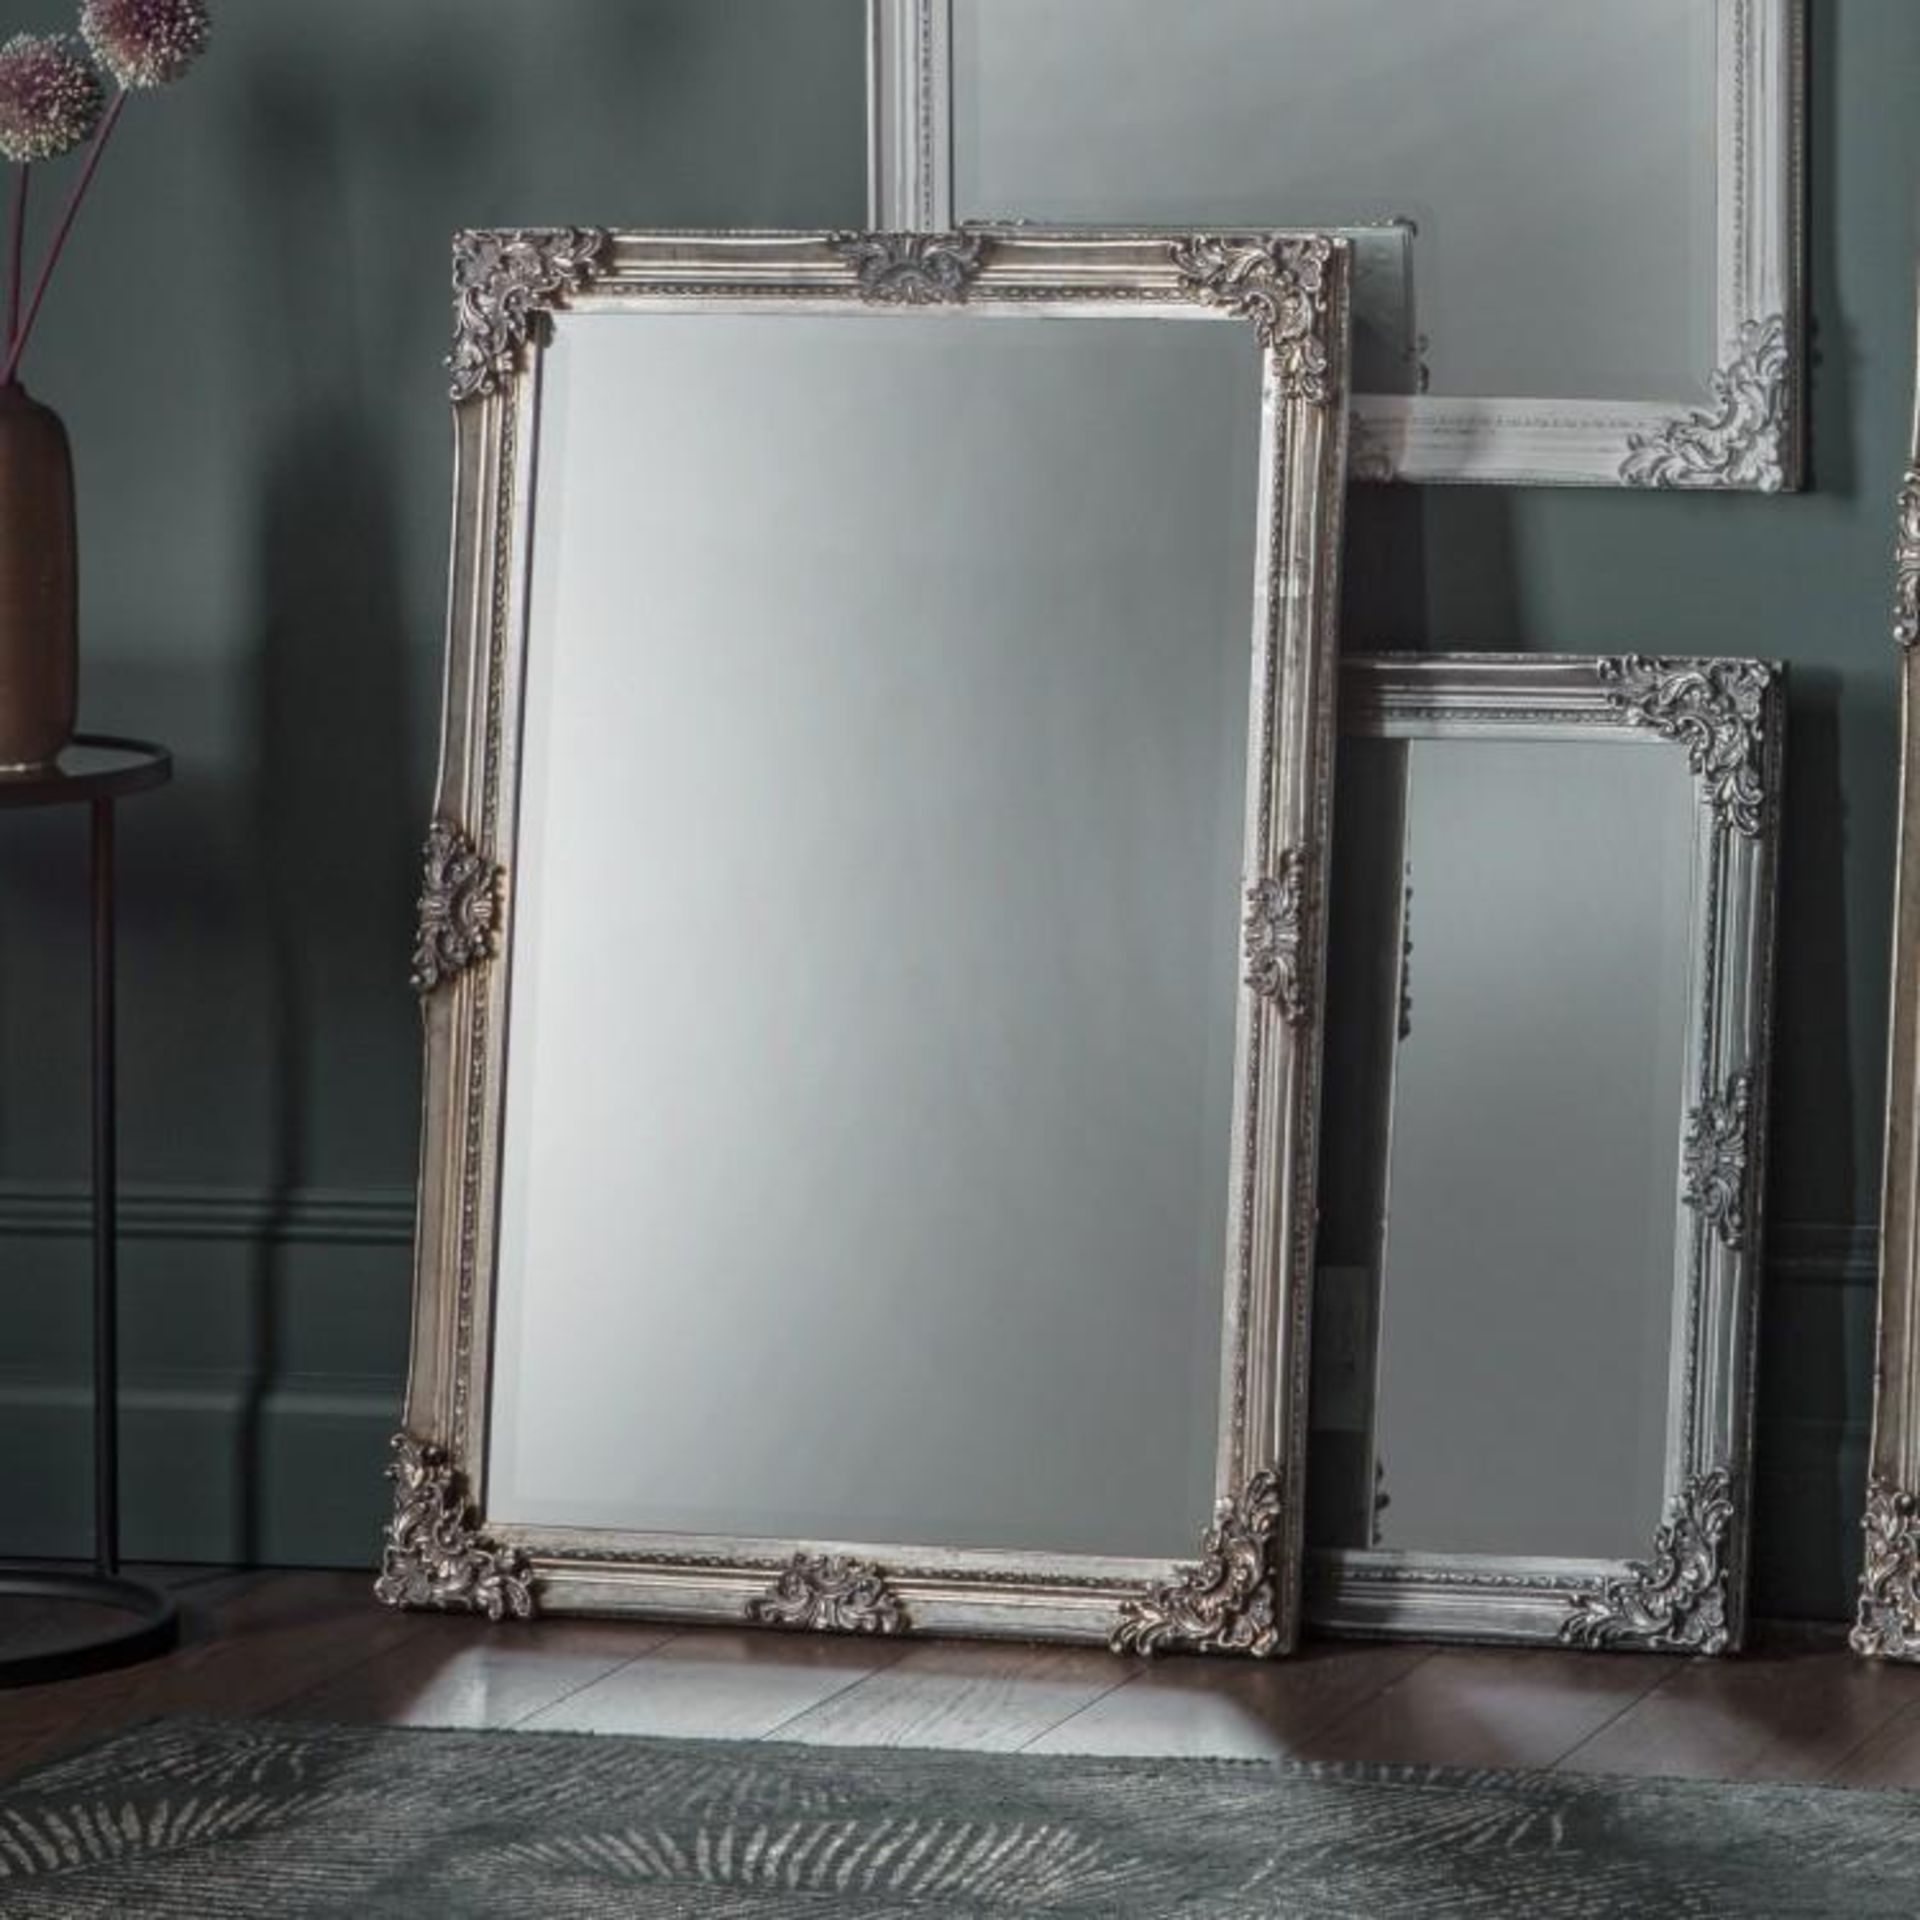 Fiennes Rectangle Mirror Silver 610 X 920mm This Vintage Inspired Piece Rectangle Mirror With Its